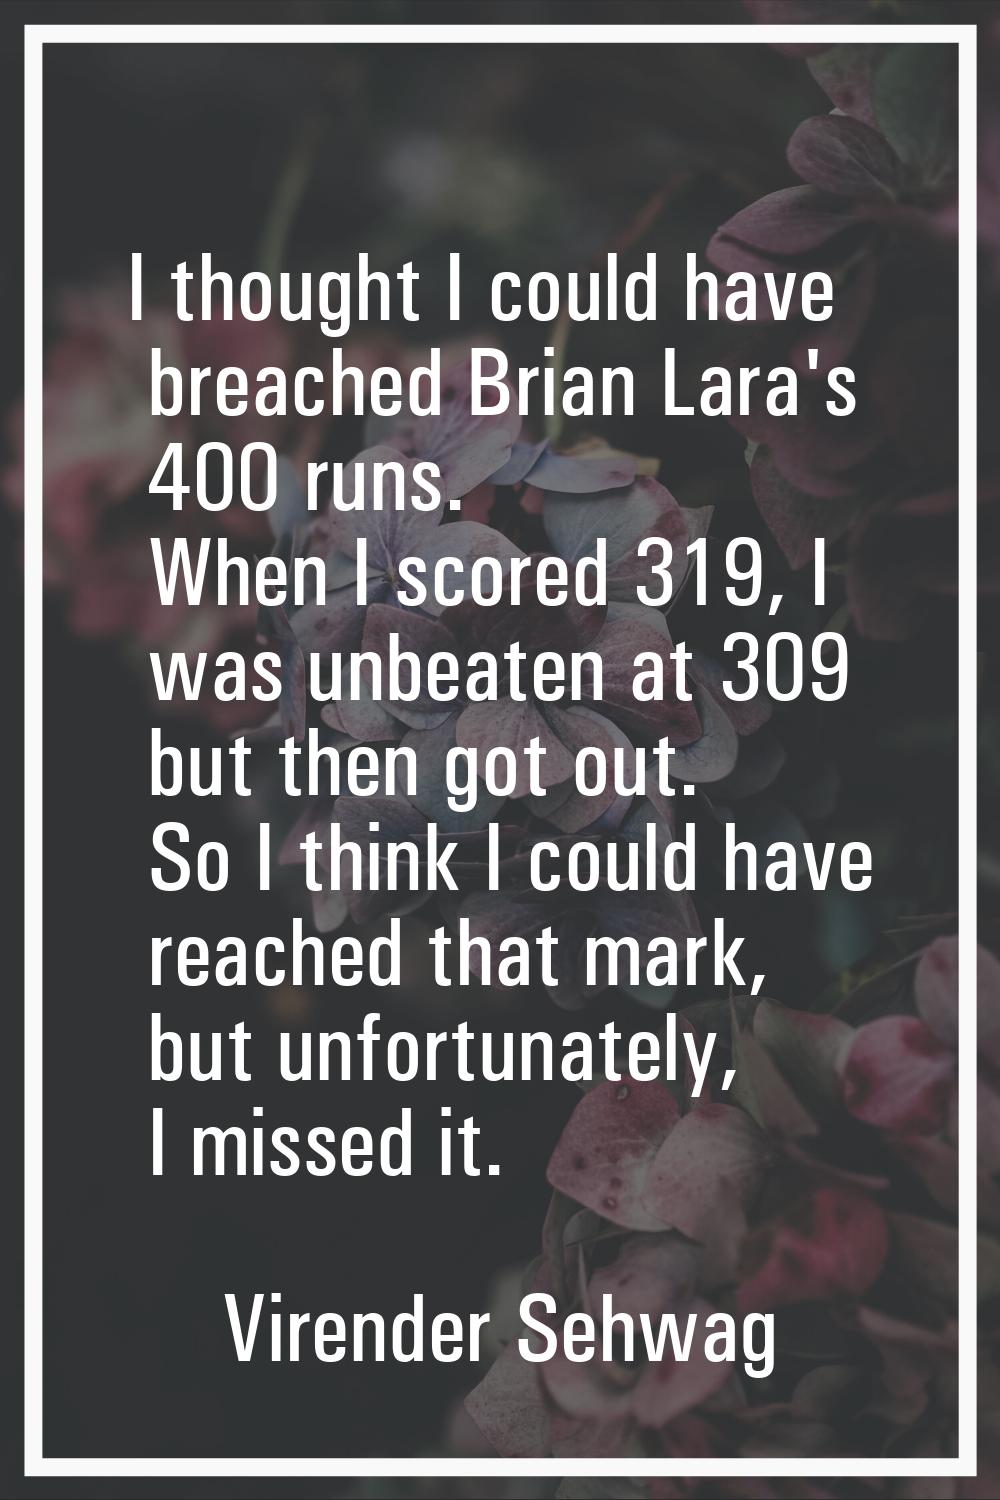 I thought I could have breached Brian Lara's 400 runs. When I scored 319, I was unbeaten at 309 but